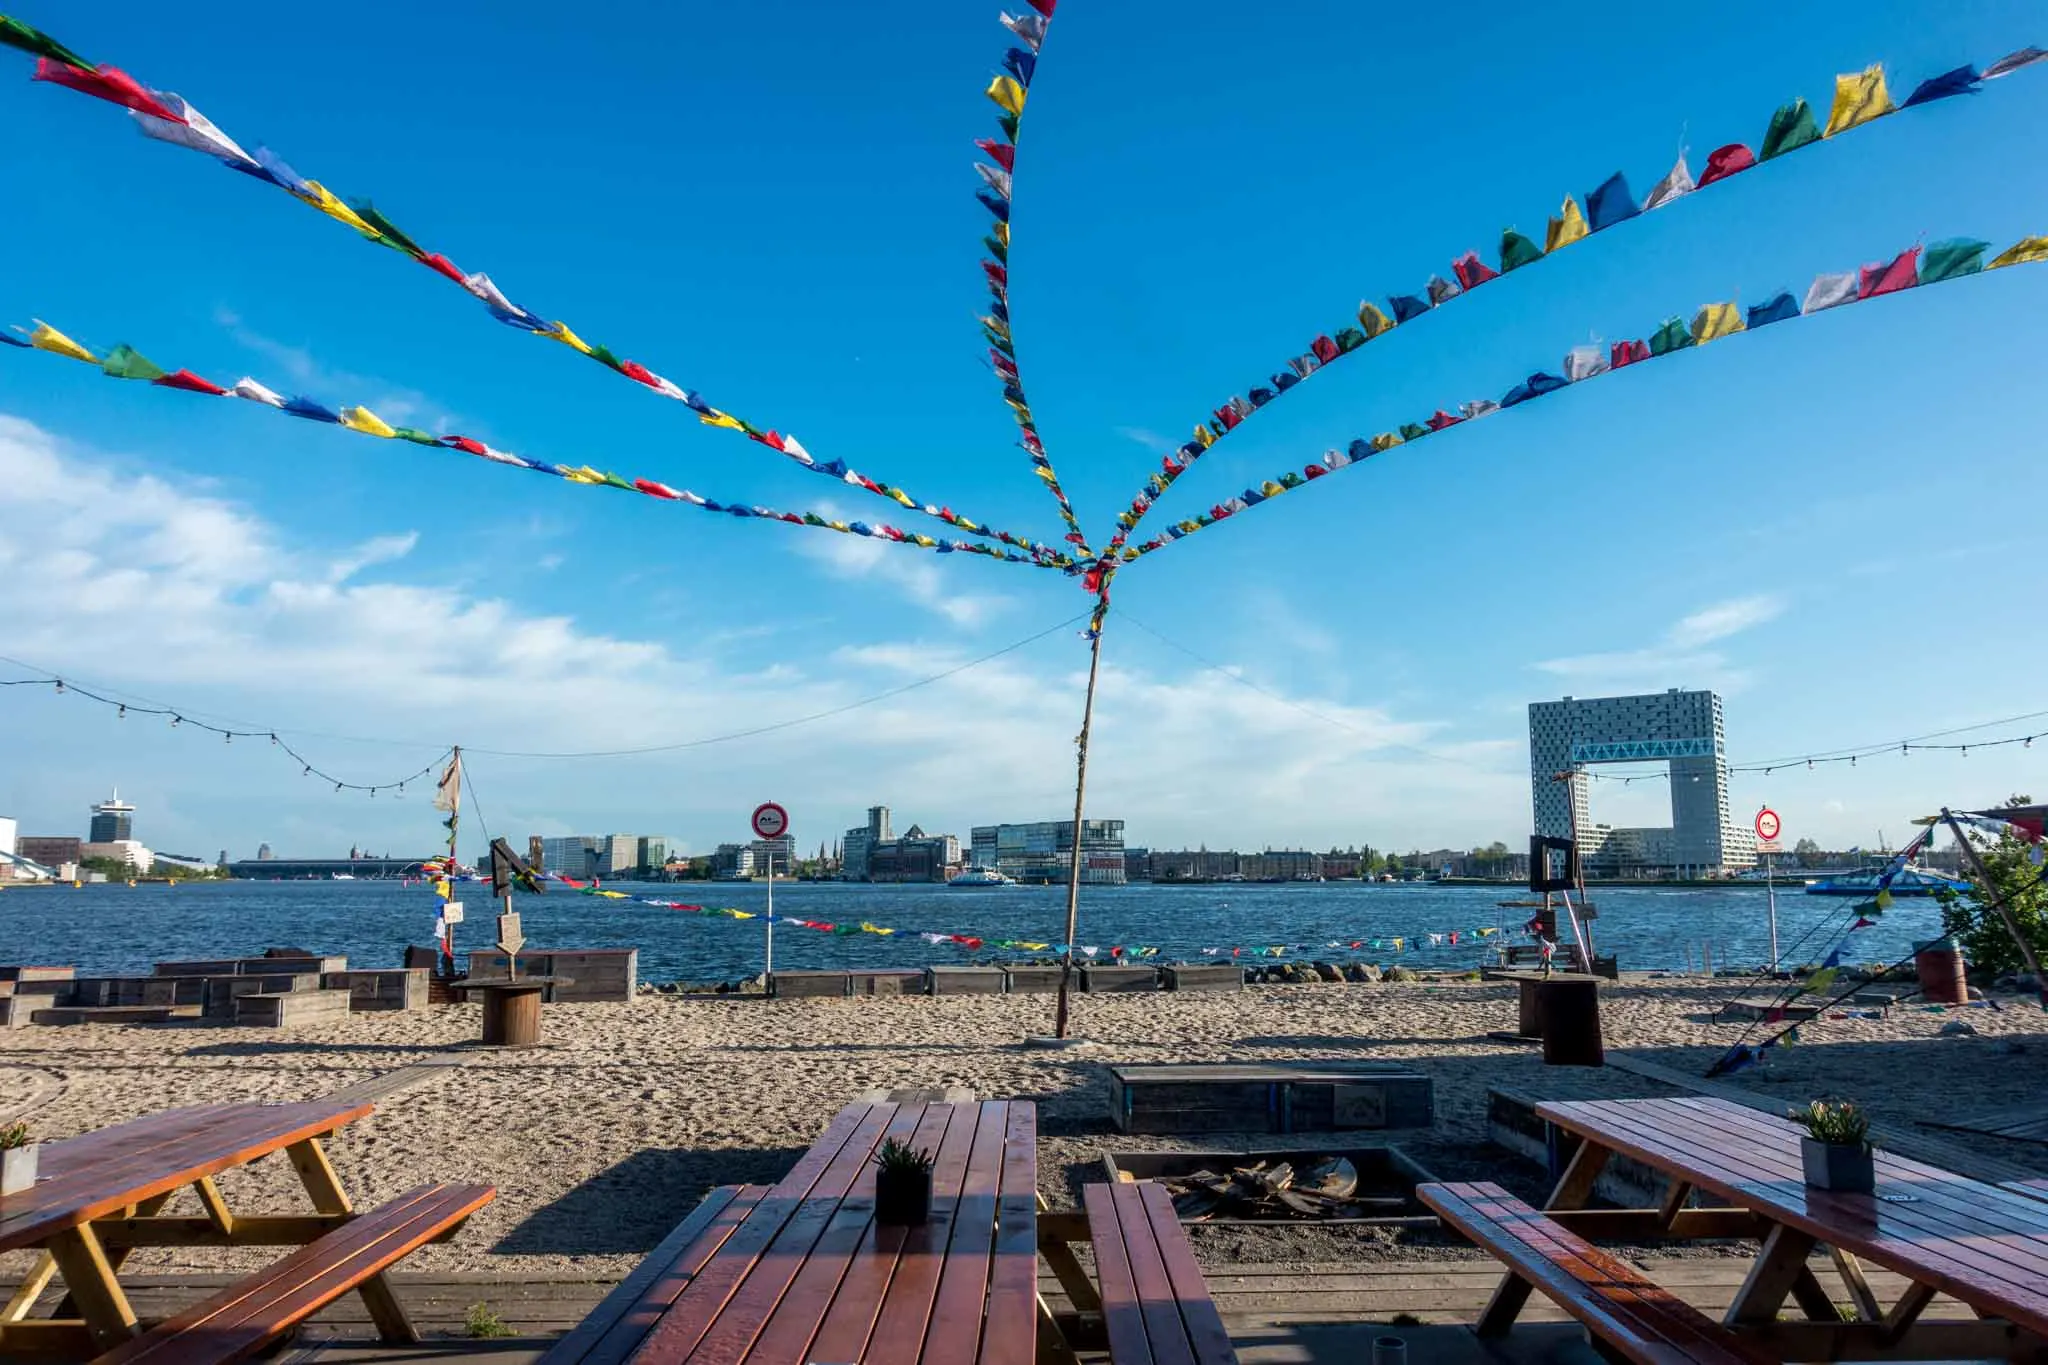 Picnic tables on a beach with flags flying overhead.